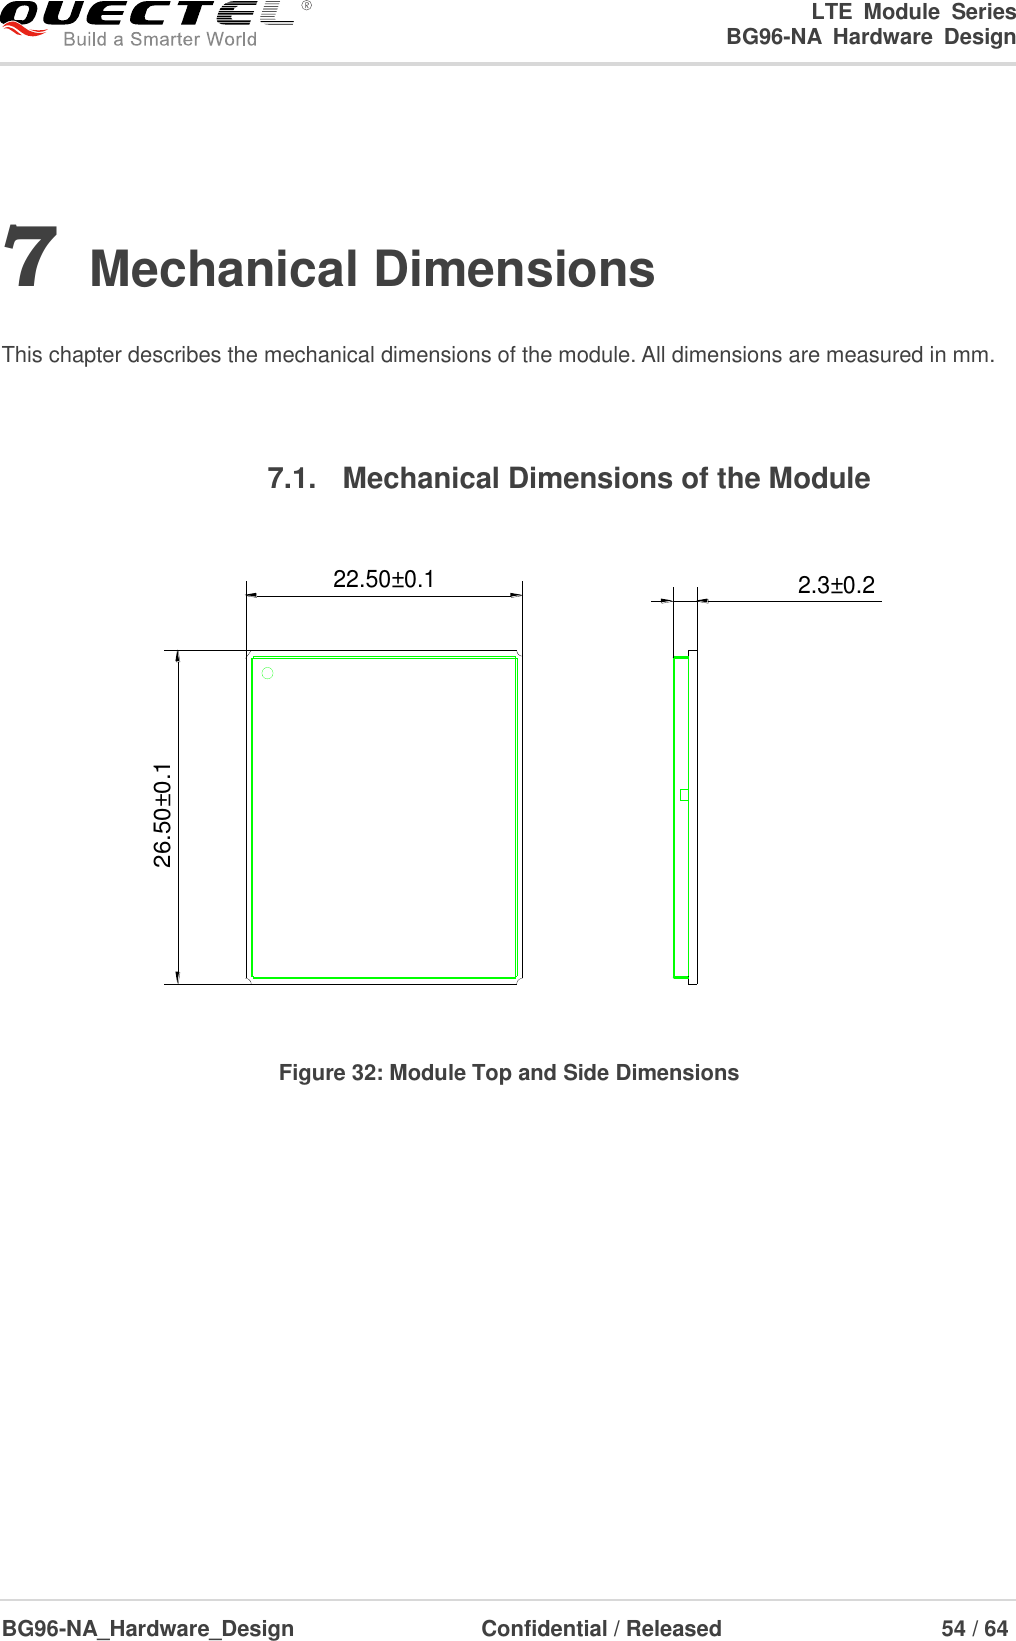 LTE  Module  Series                                                  BG96-NA  Hardware  Design  BG96-NA_Hardware_Design                              Confidential / Released                                  54 / 64    7 Mechanical Dimensions  This chapter describes the mechanical dimensions of the module. All dimensions are measured in mm.  7.1.  Mechanical Dimensions of the Module 22.50±0.126.50±0.12.3±0.2 Figure 32: Module Top and Side Dimensions  